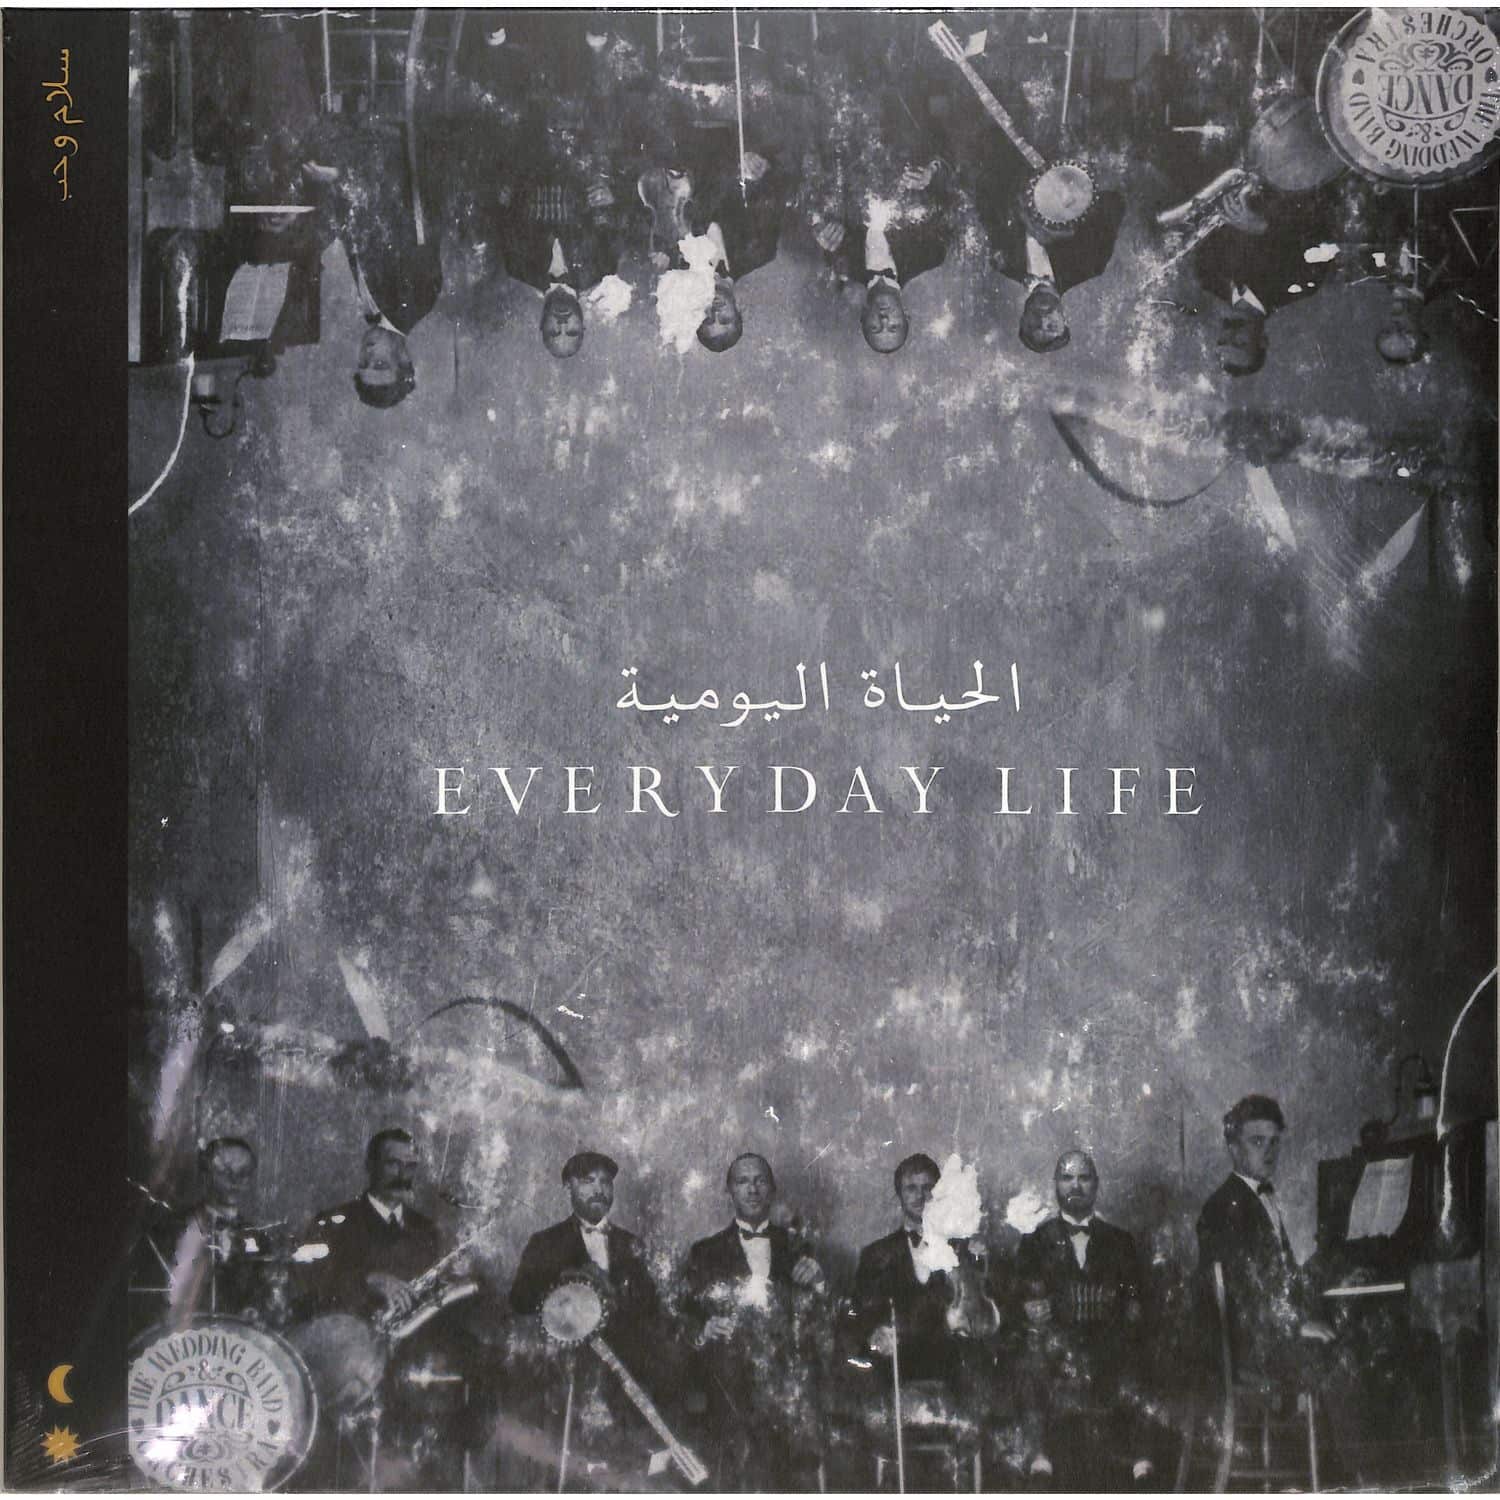 Coldplay - EVERYDAY LIFE 